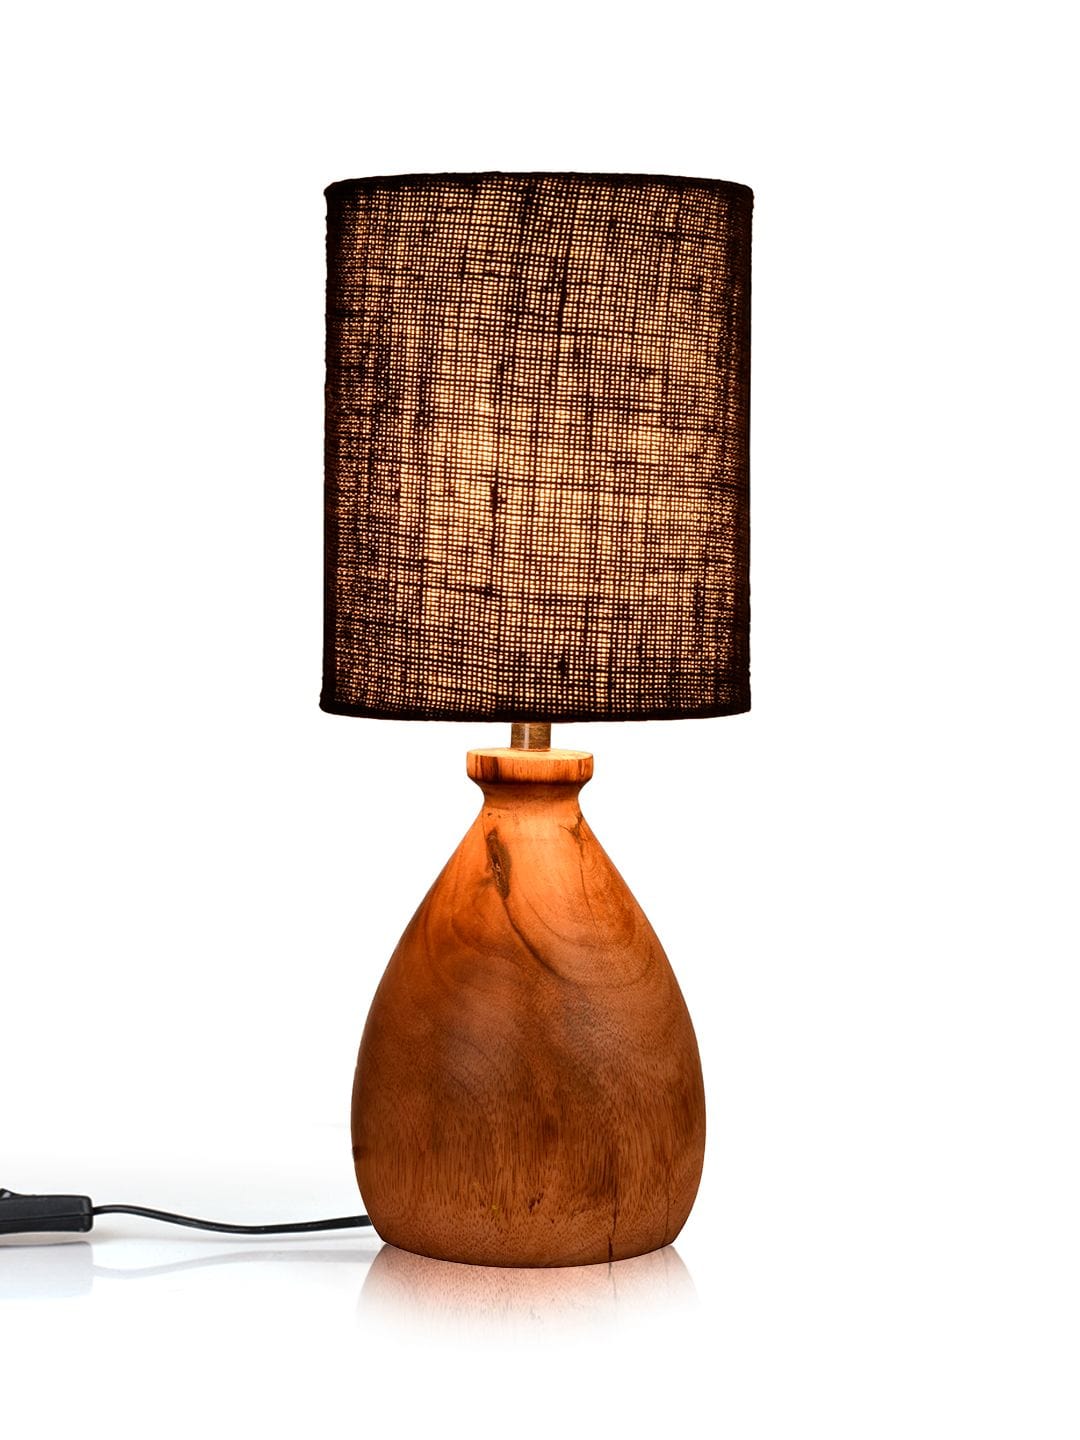 Wooden Dome Table Lamp with Jute Black Shade